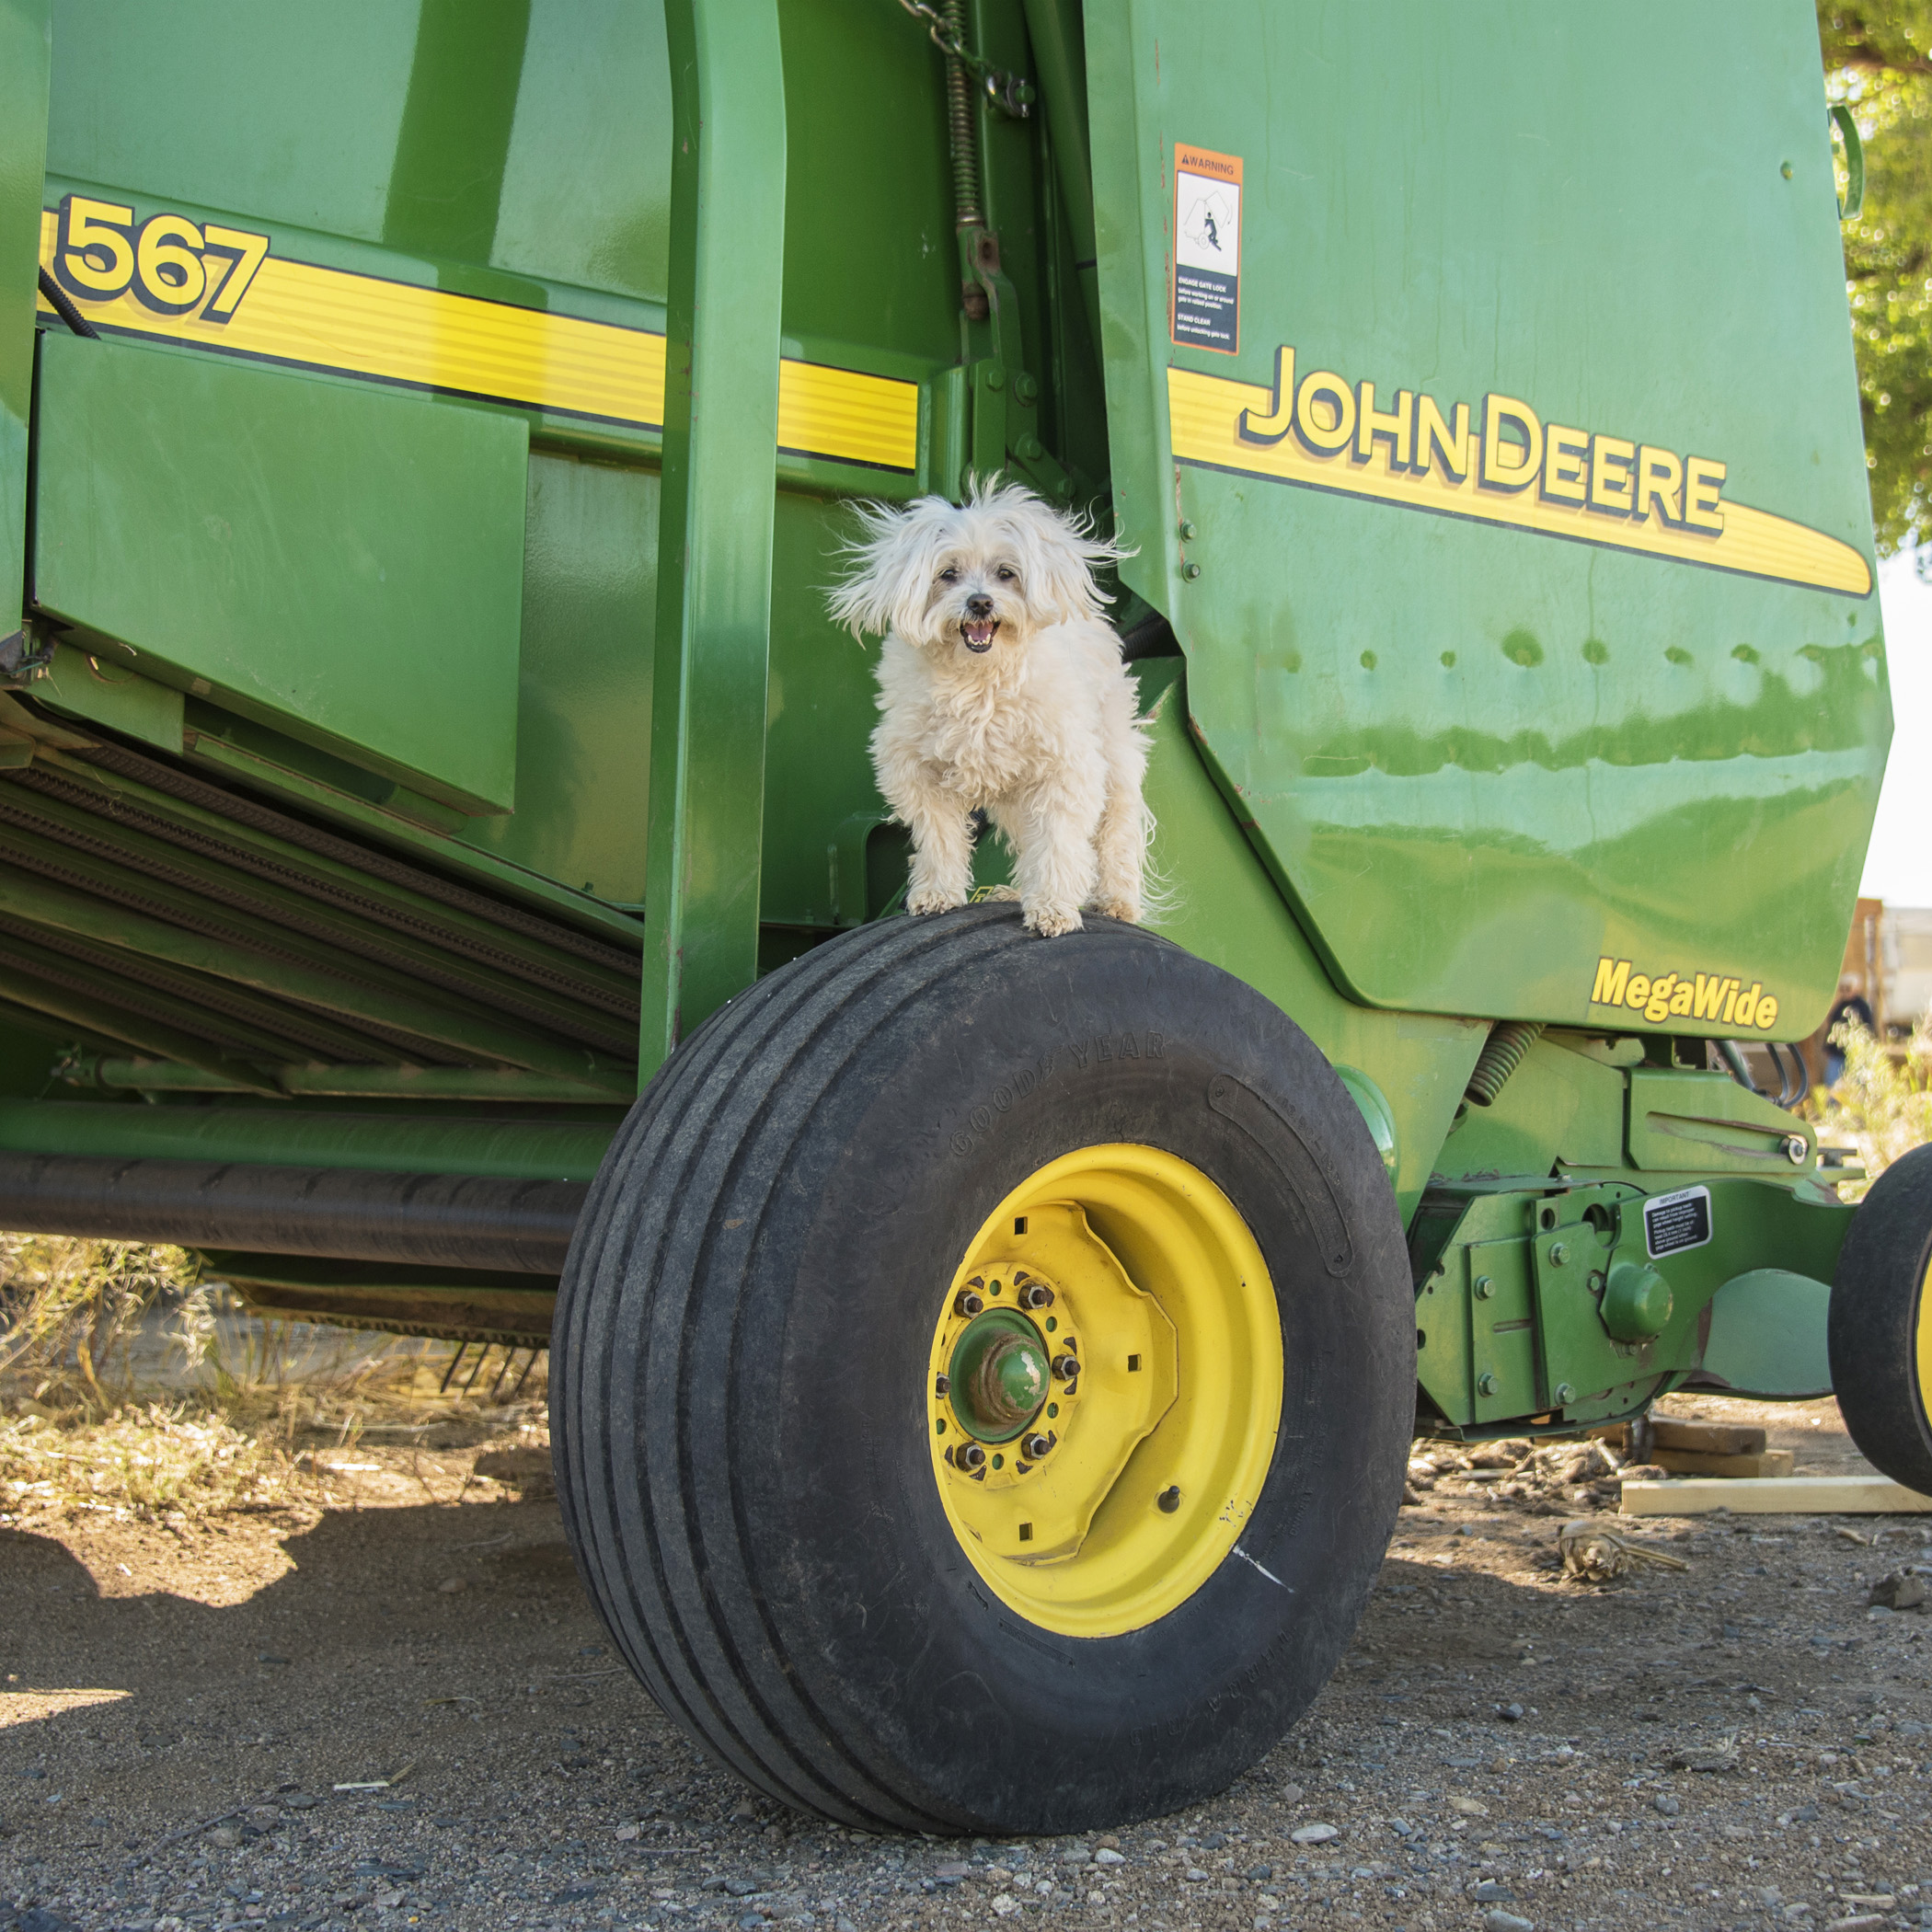  There was a break between the morning runs and the afternoon runs, so we did some extra exploring. Pebbles was practicing her model skills. What do you think, future John Deere model? 